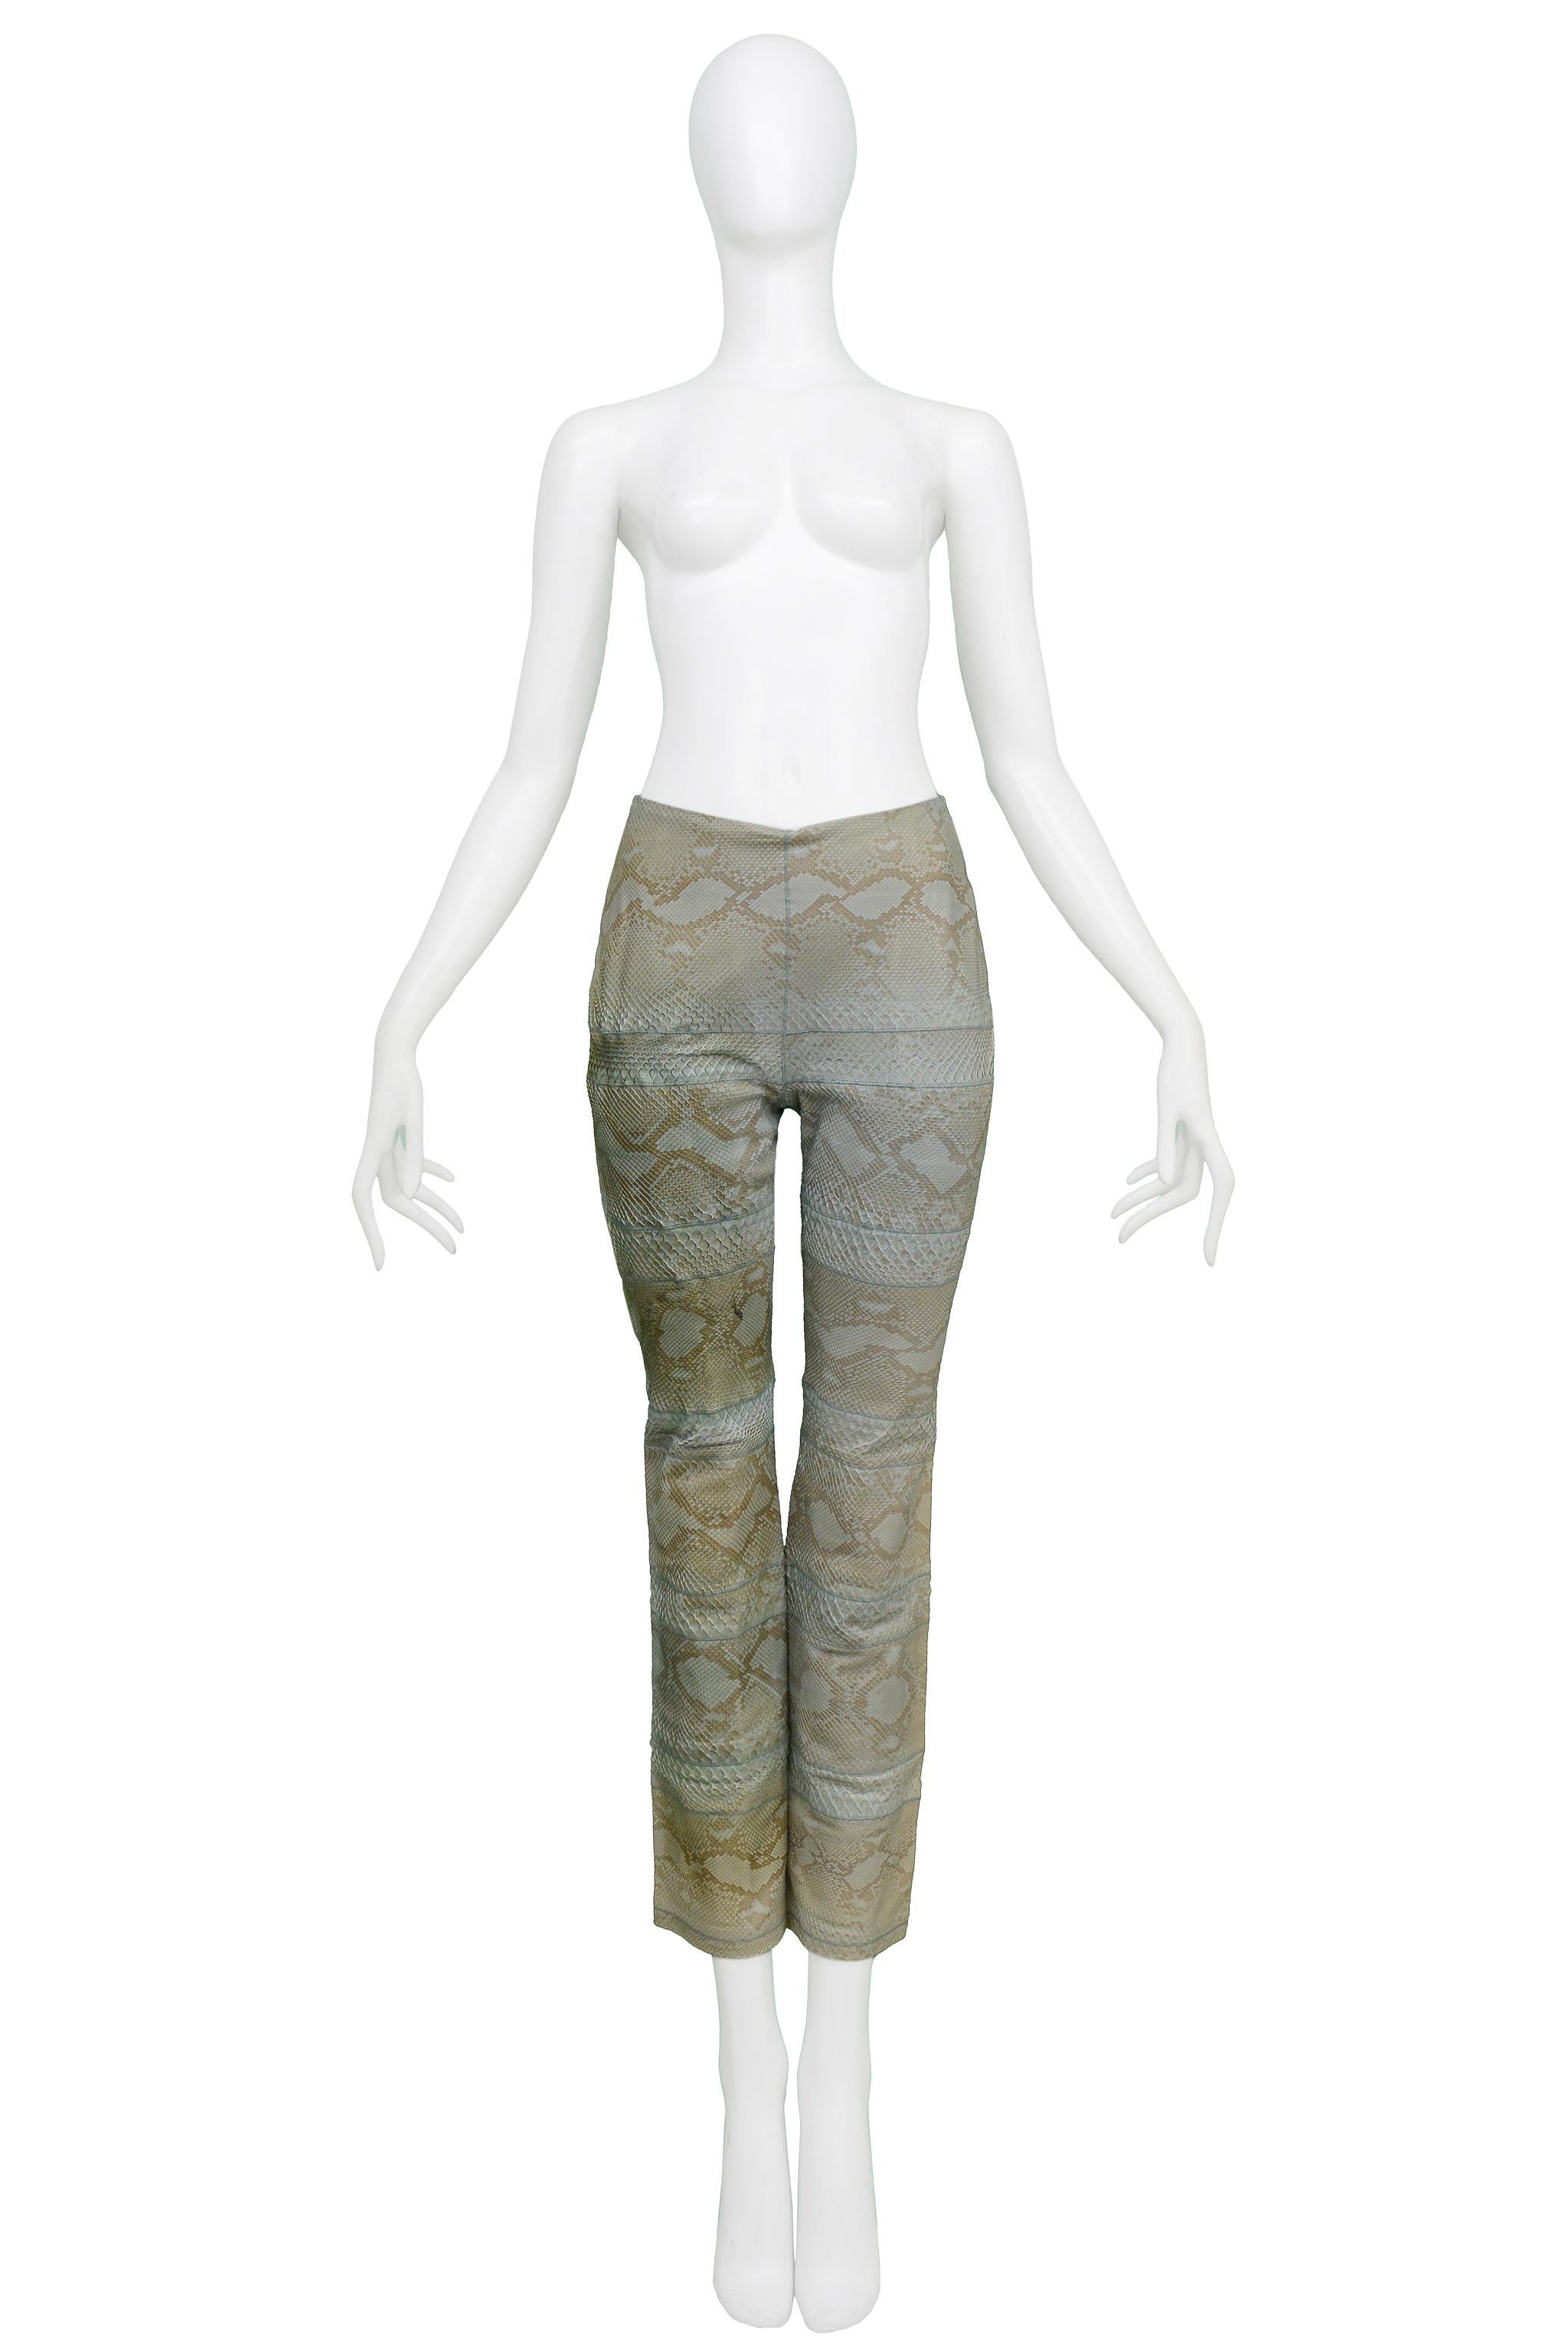 Resurrection Vintage is excited to offer a pair of vintage Versace Couture light blue python leather pants featuring a high-waist, slim fit, skinny legs, paneling, blue stitching, light blue lining, and center back zipper. 

Versace
Size 38
100%